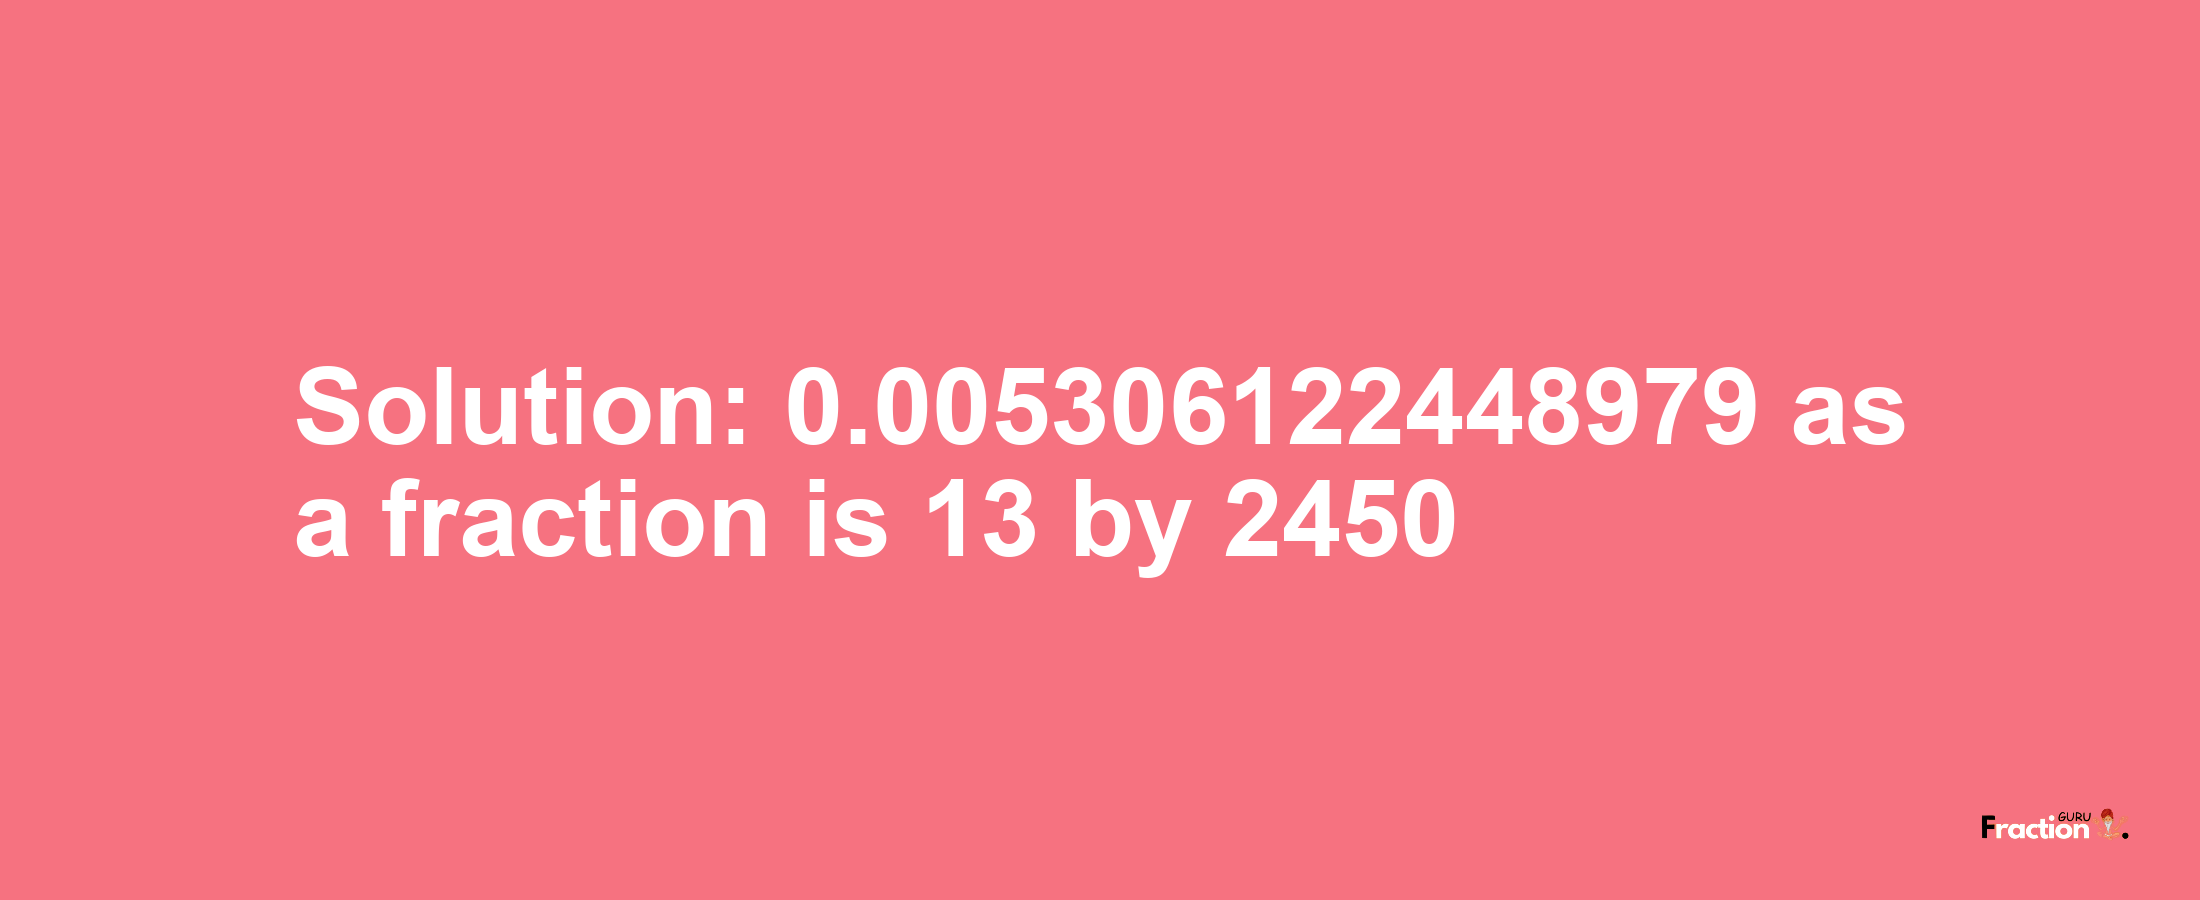 Solution:0.005306122448979 as a fraction is 13/2450